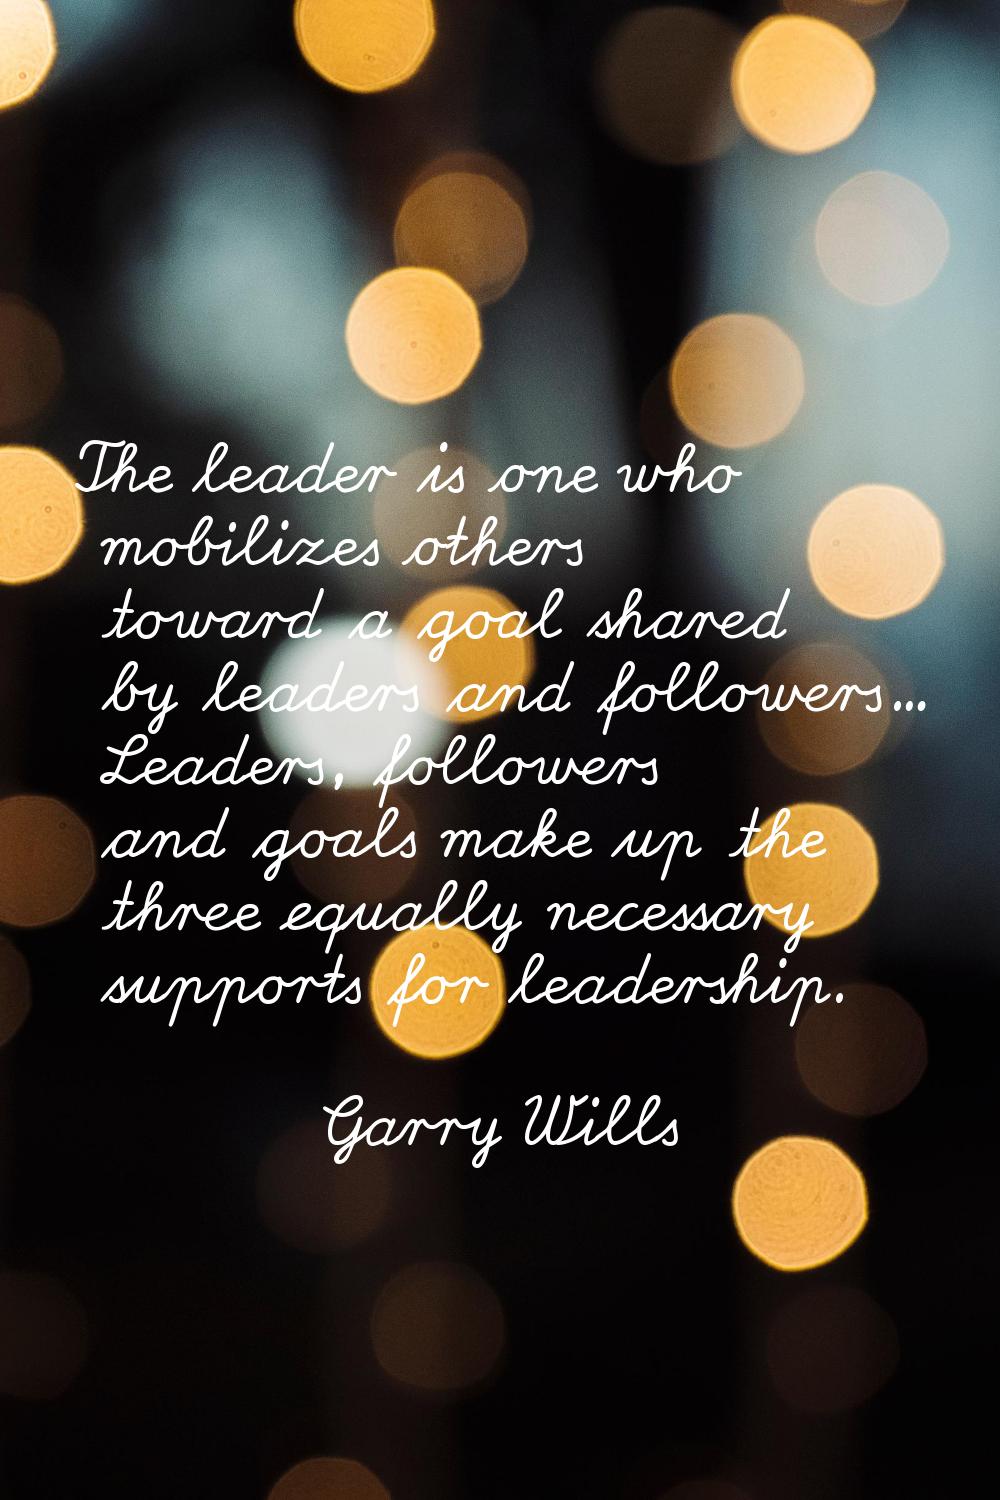 The leader is one who mobilizes others toward a goal shared by leaders and followers... Leaders, fo